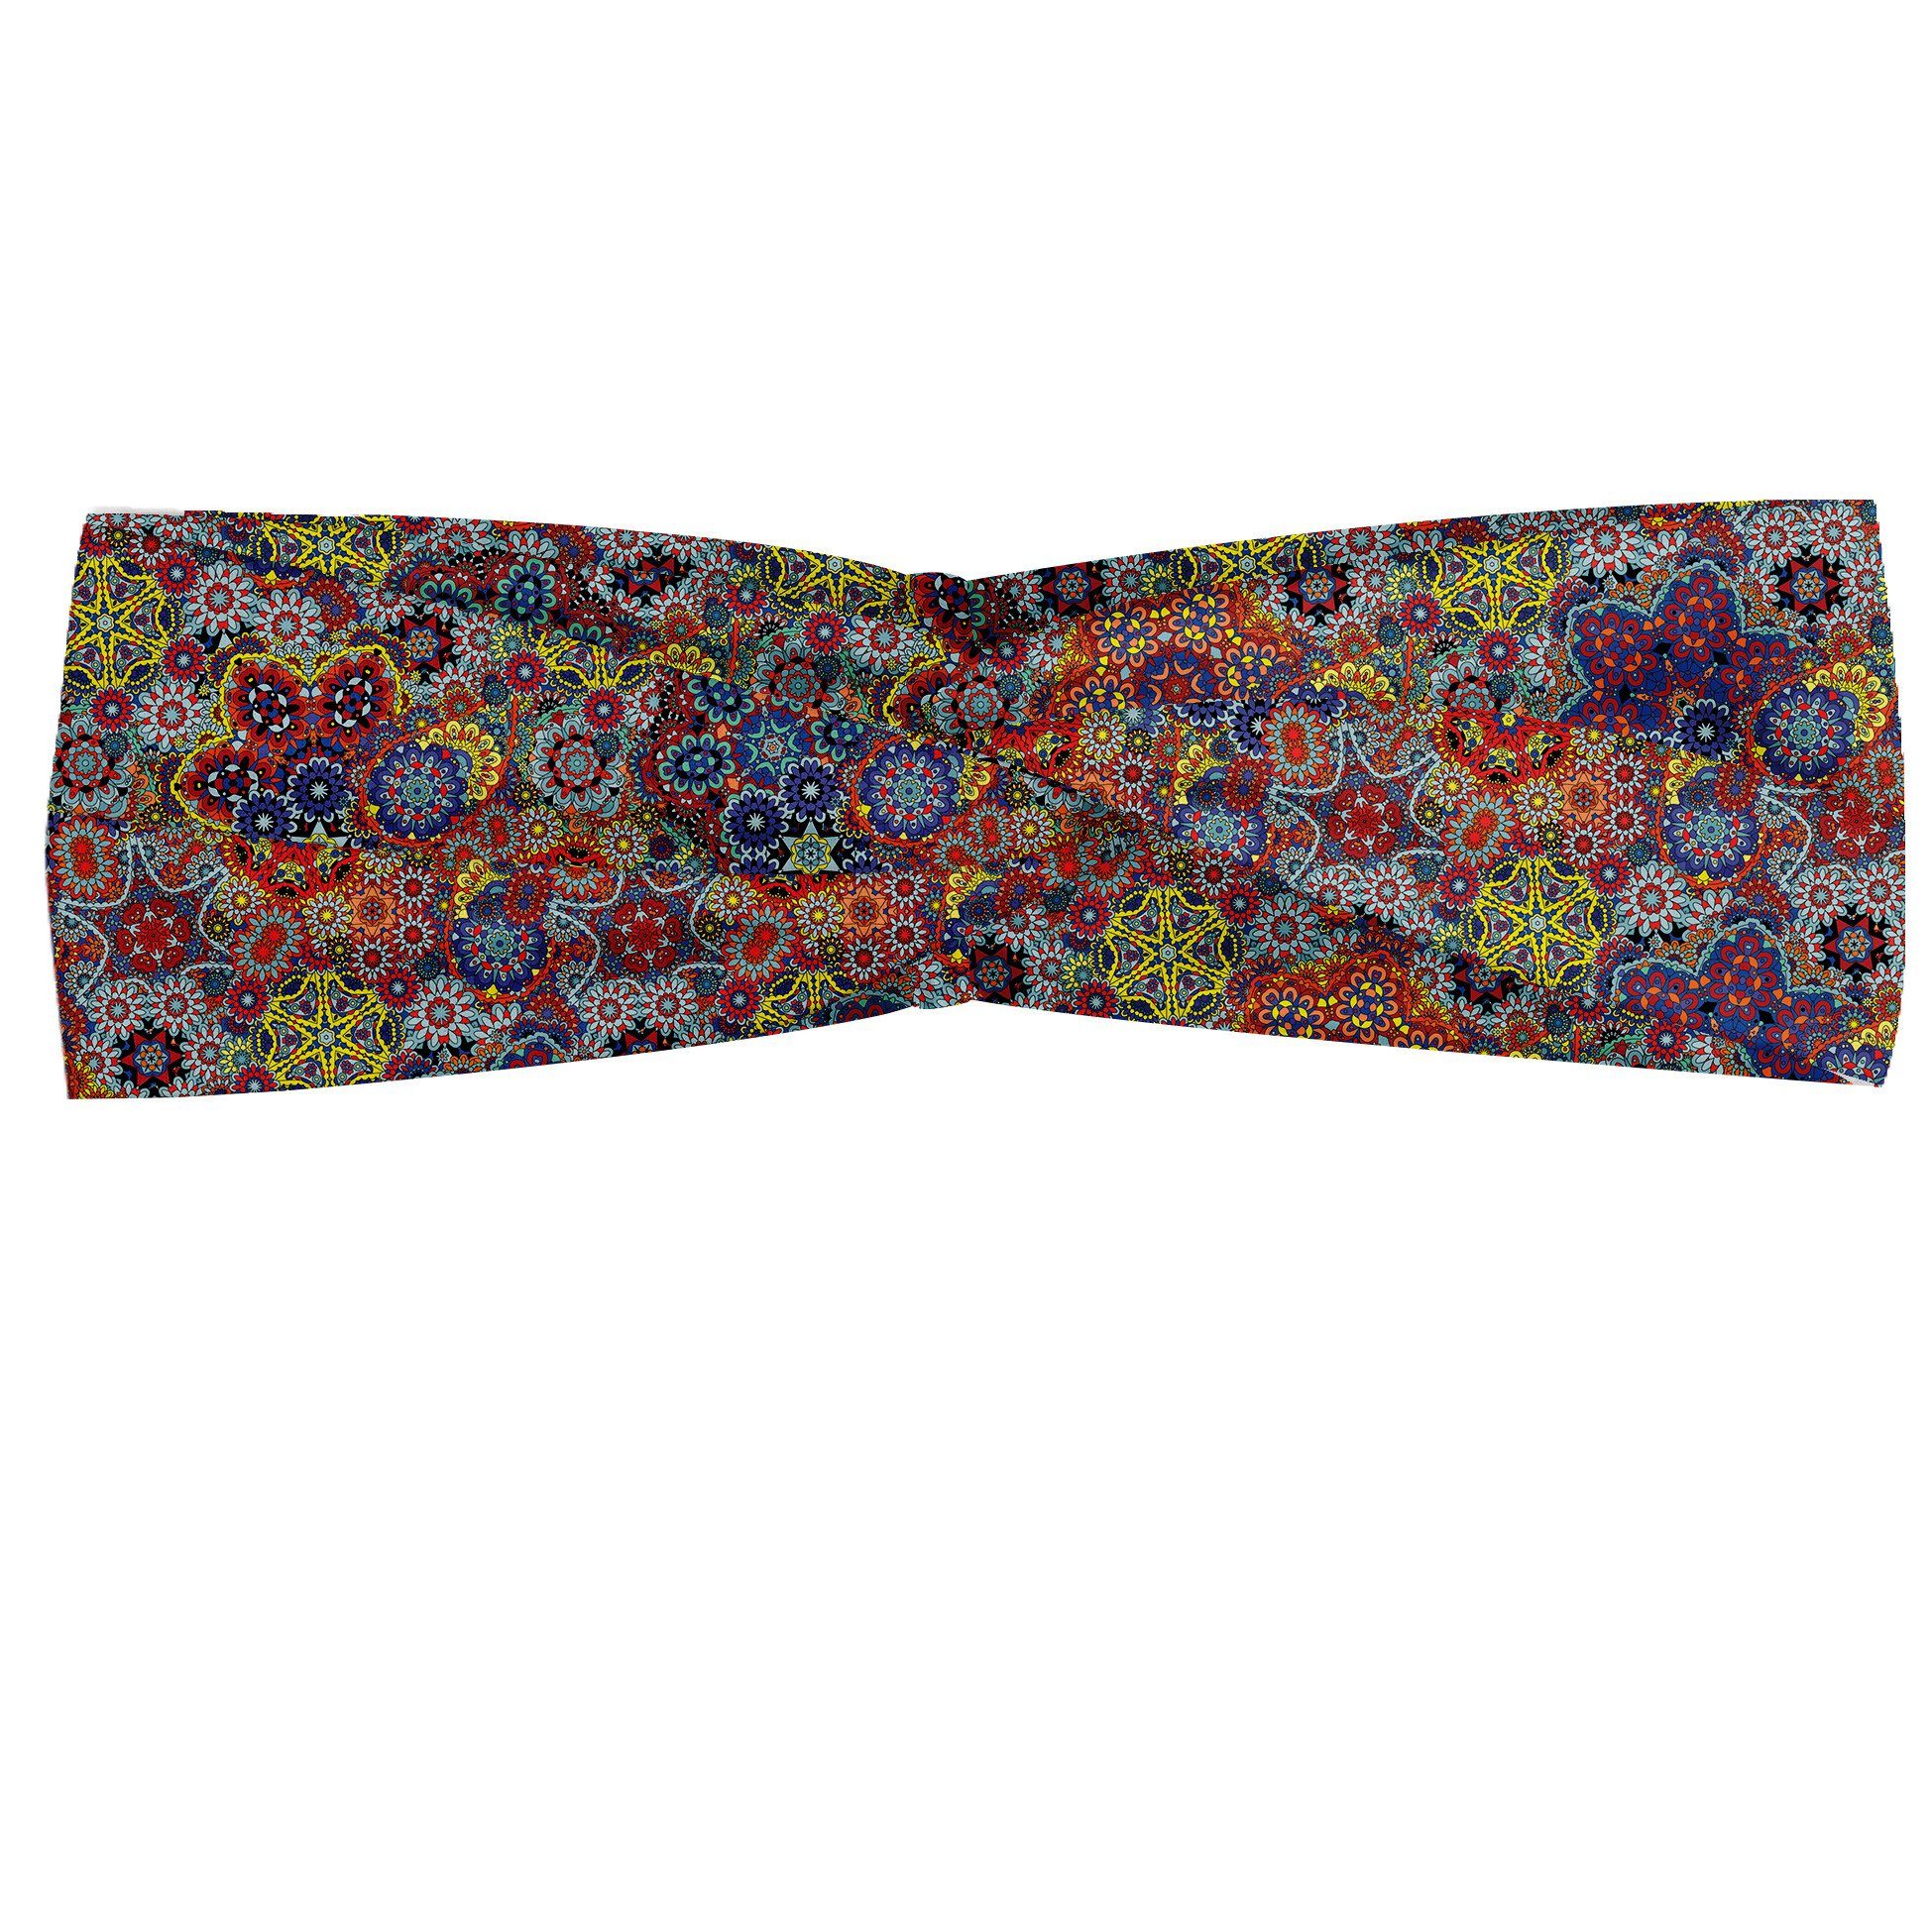 Abakuhaus Stirnband Elastisch und Angenehme alltags accessories Paisley Combined Nested Paisley